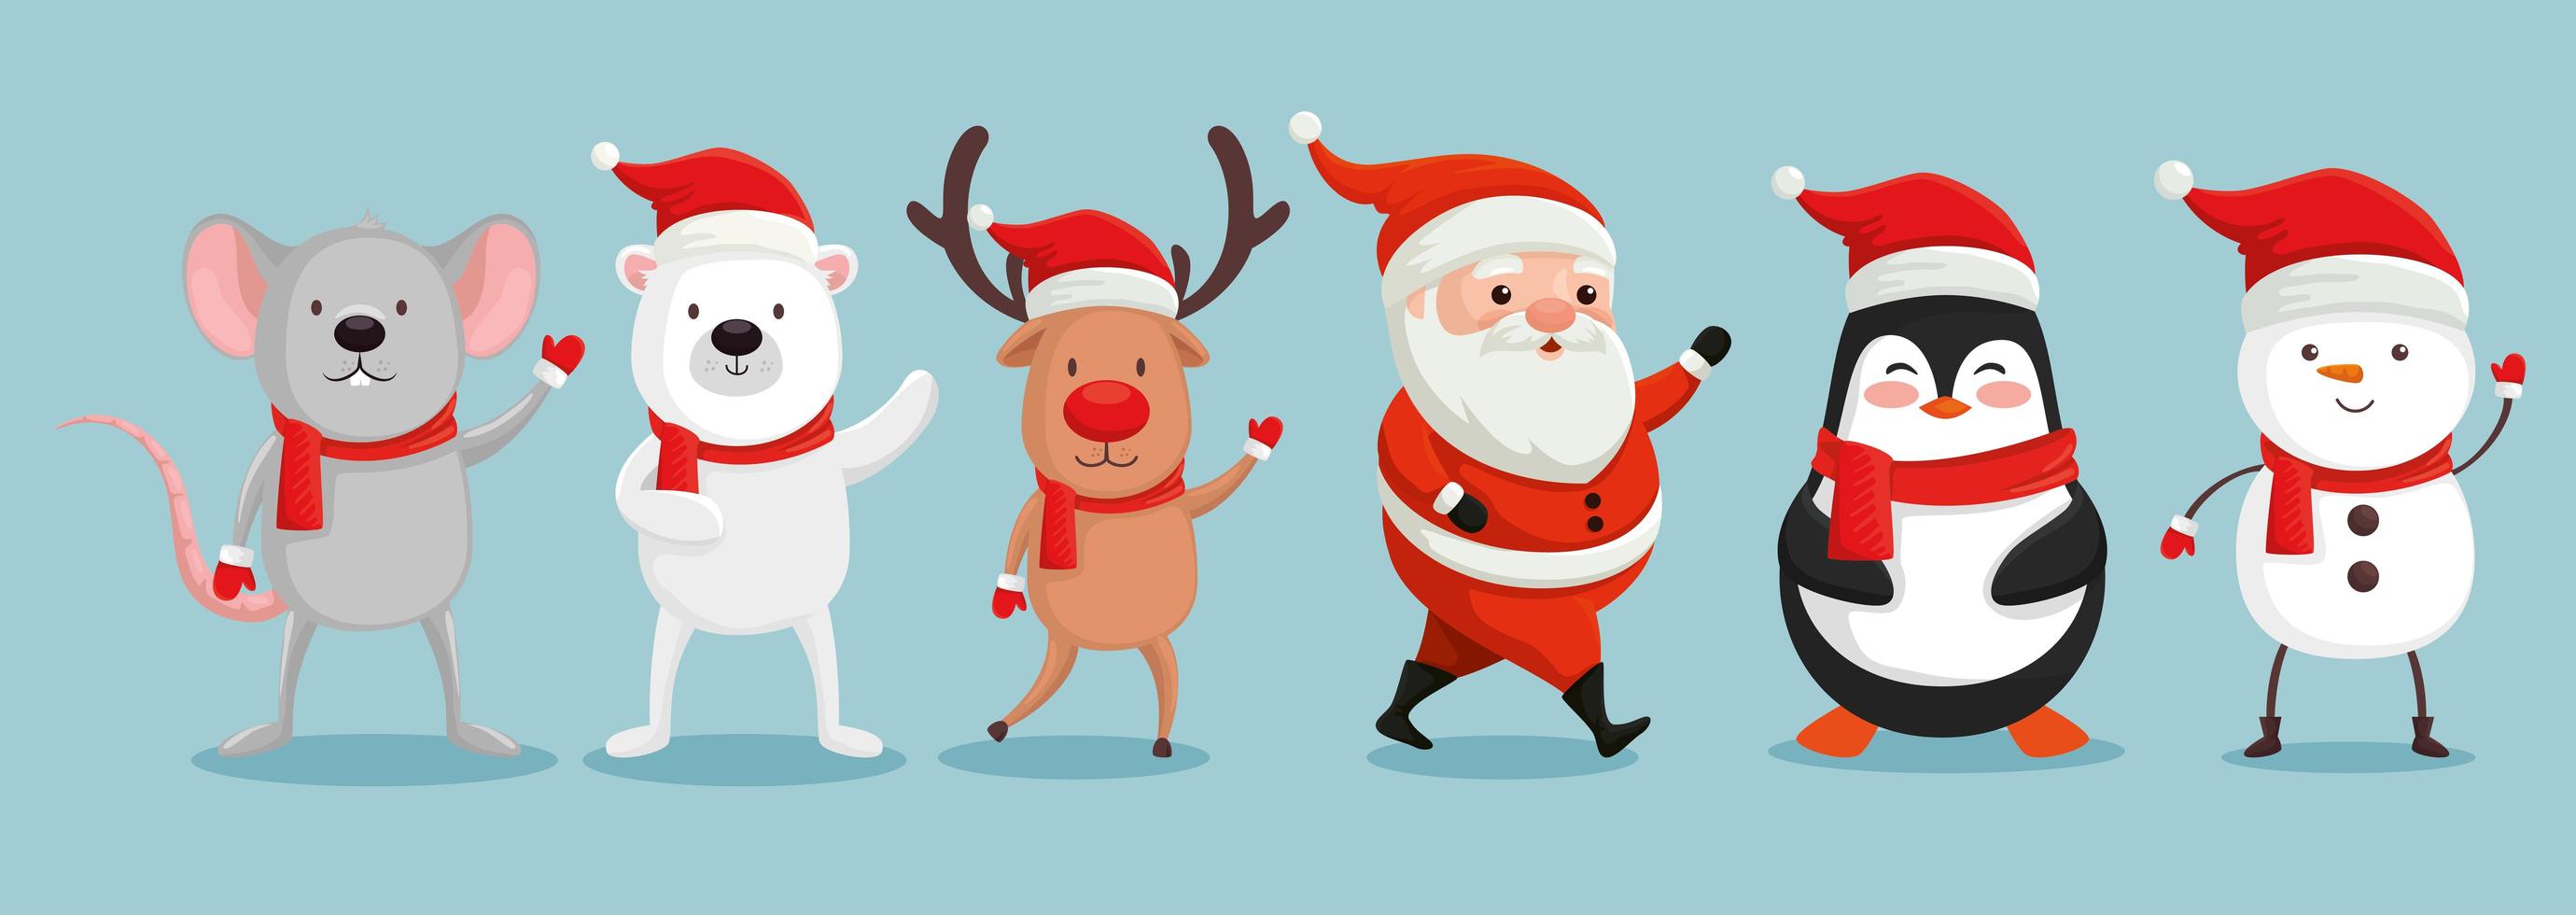 group of cute characters christmas vector